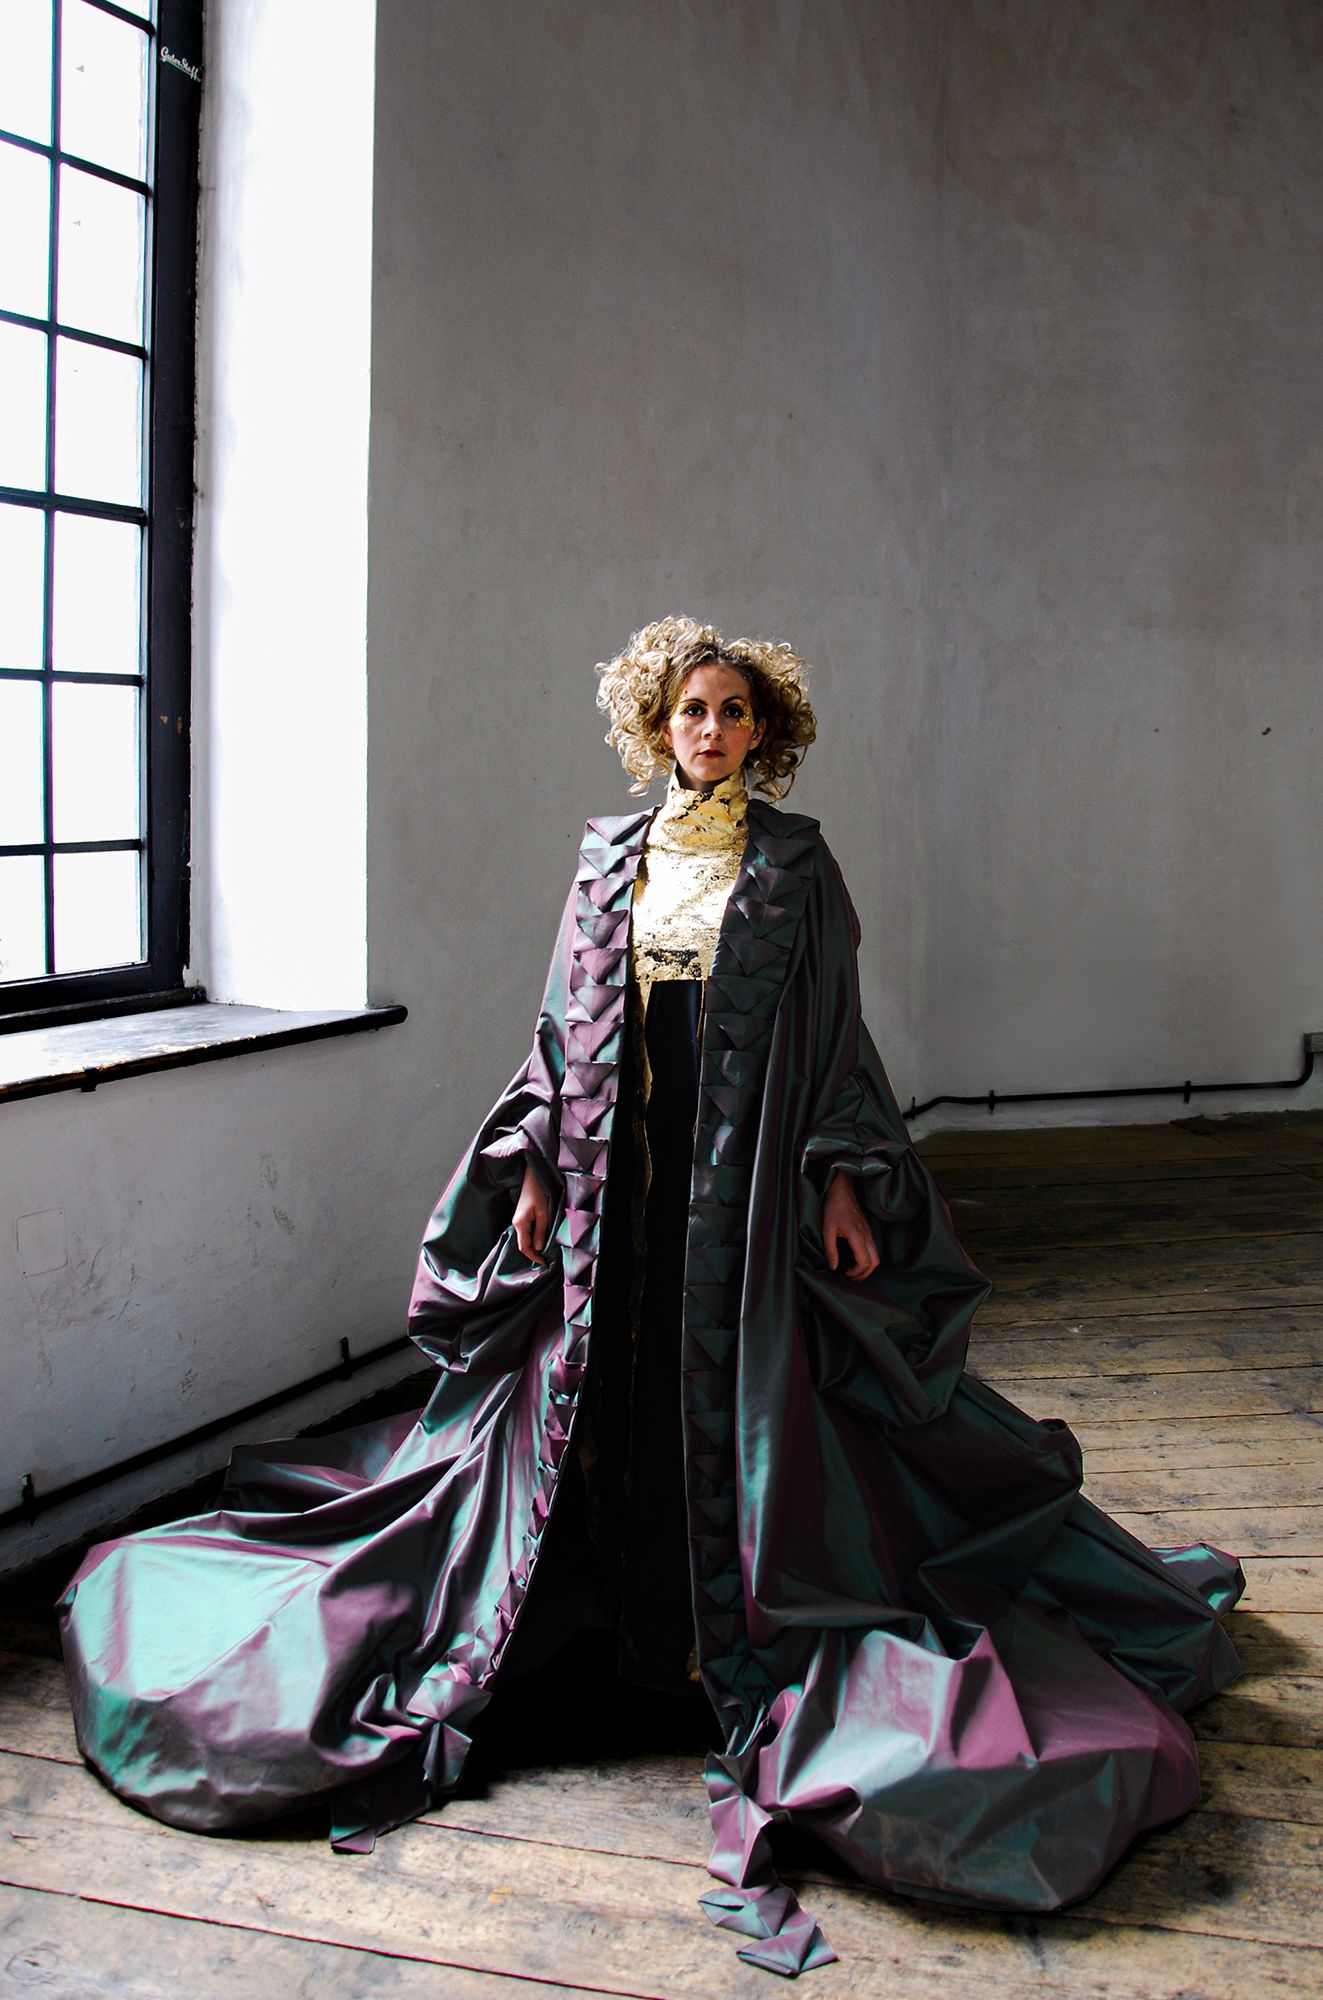  a woman with blonde curly hair, standing, modelling the costume, looking at the camera. Wearing a large purple/green coat which falls to the floor 